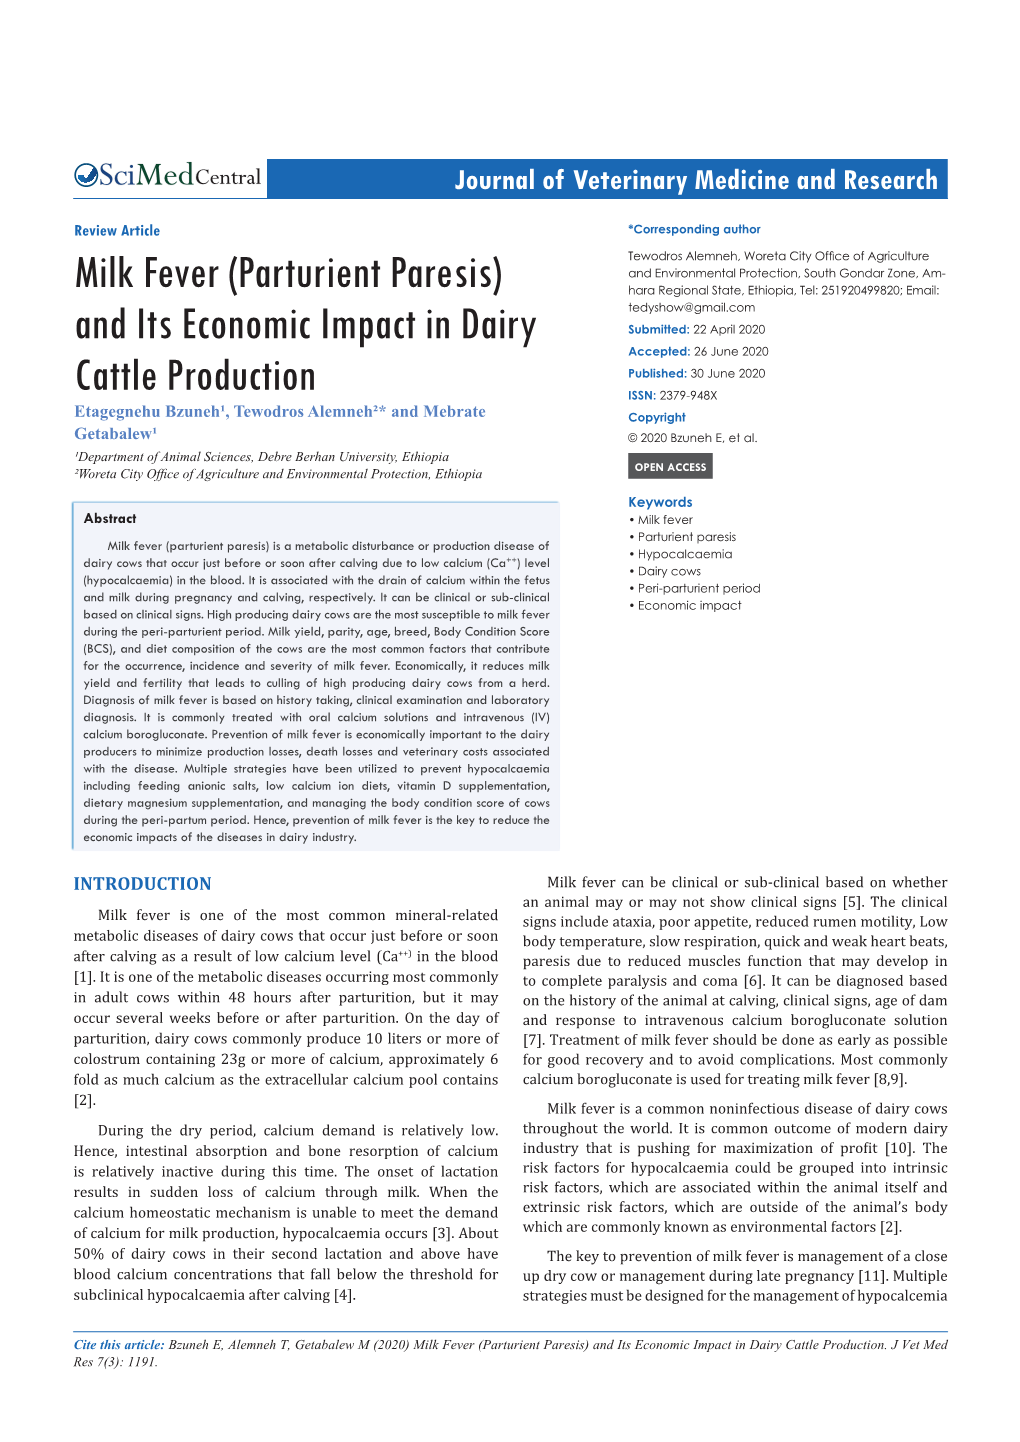 (Parturient Paresis) and Its Economic Impact in Dairy Cattle Production